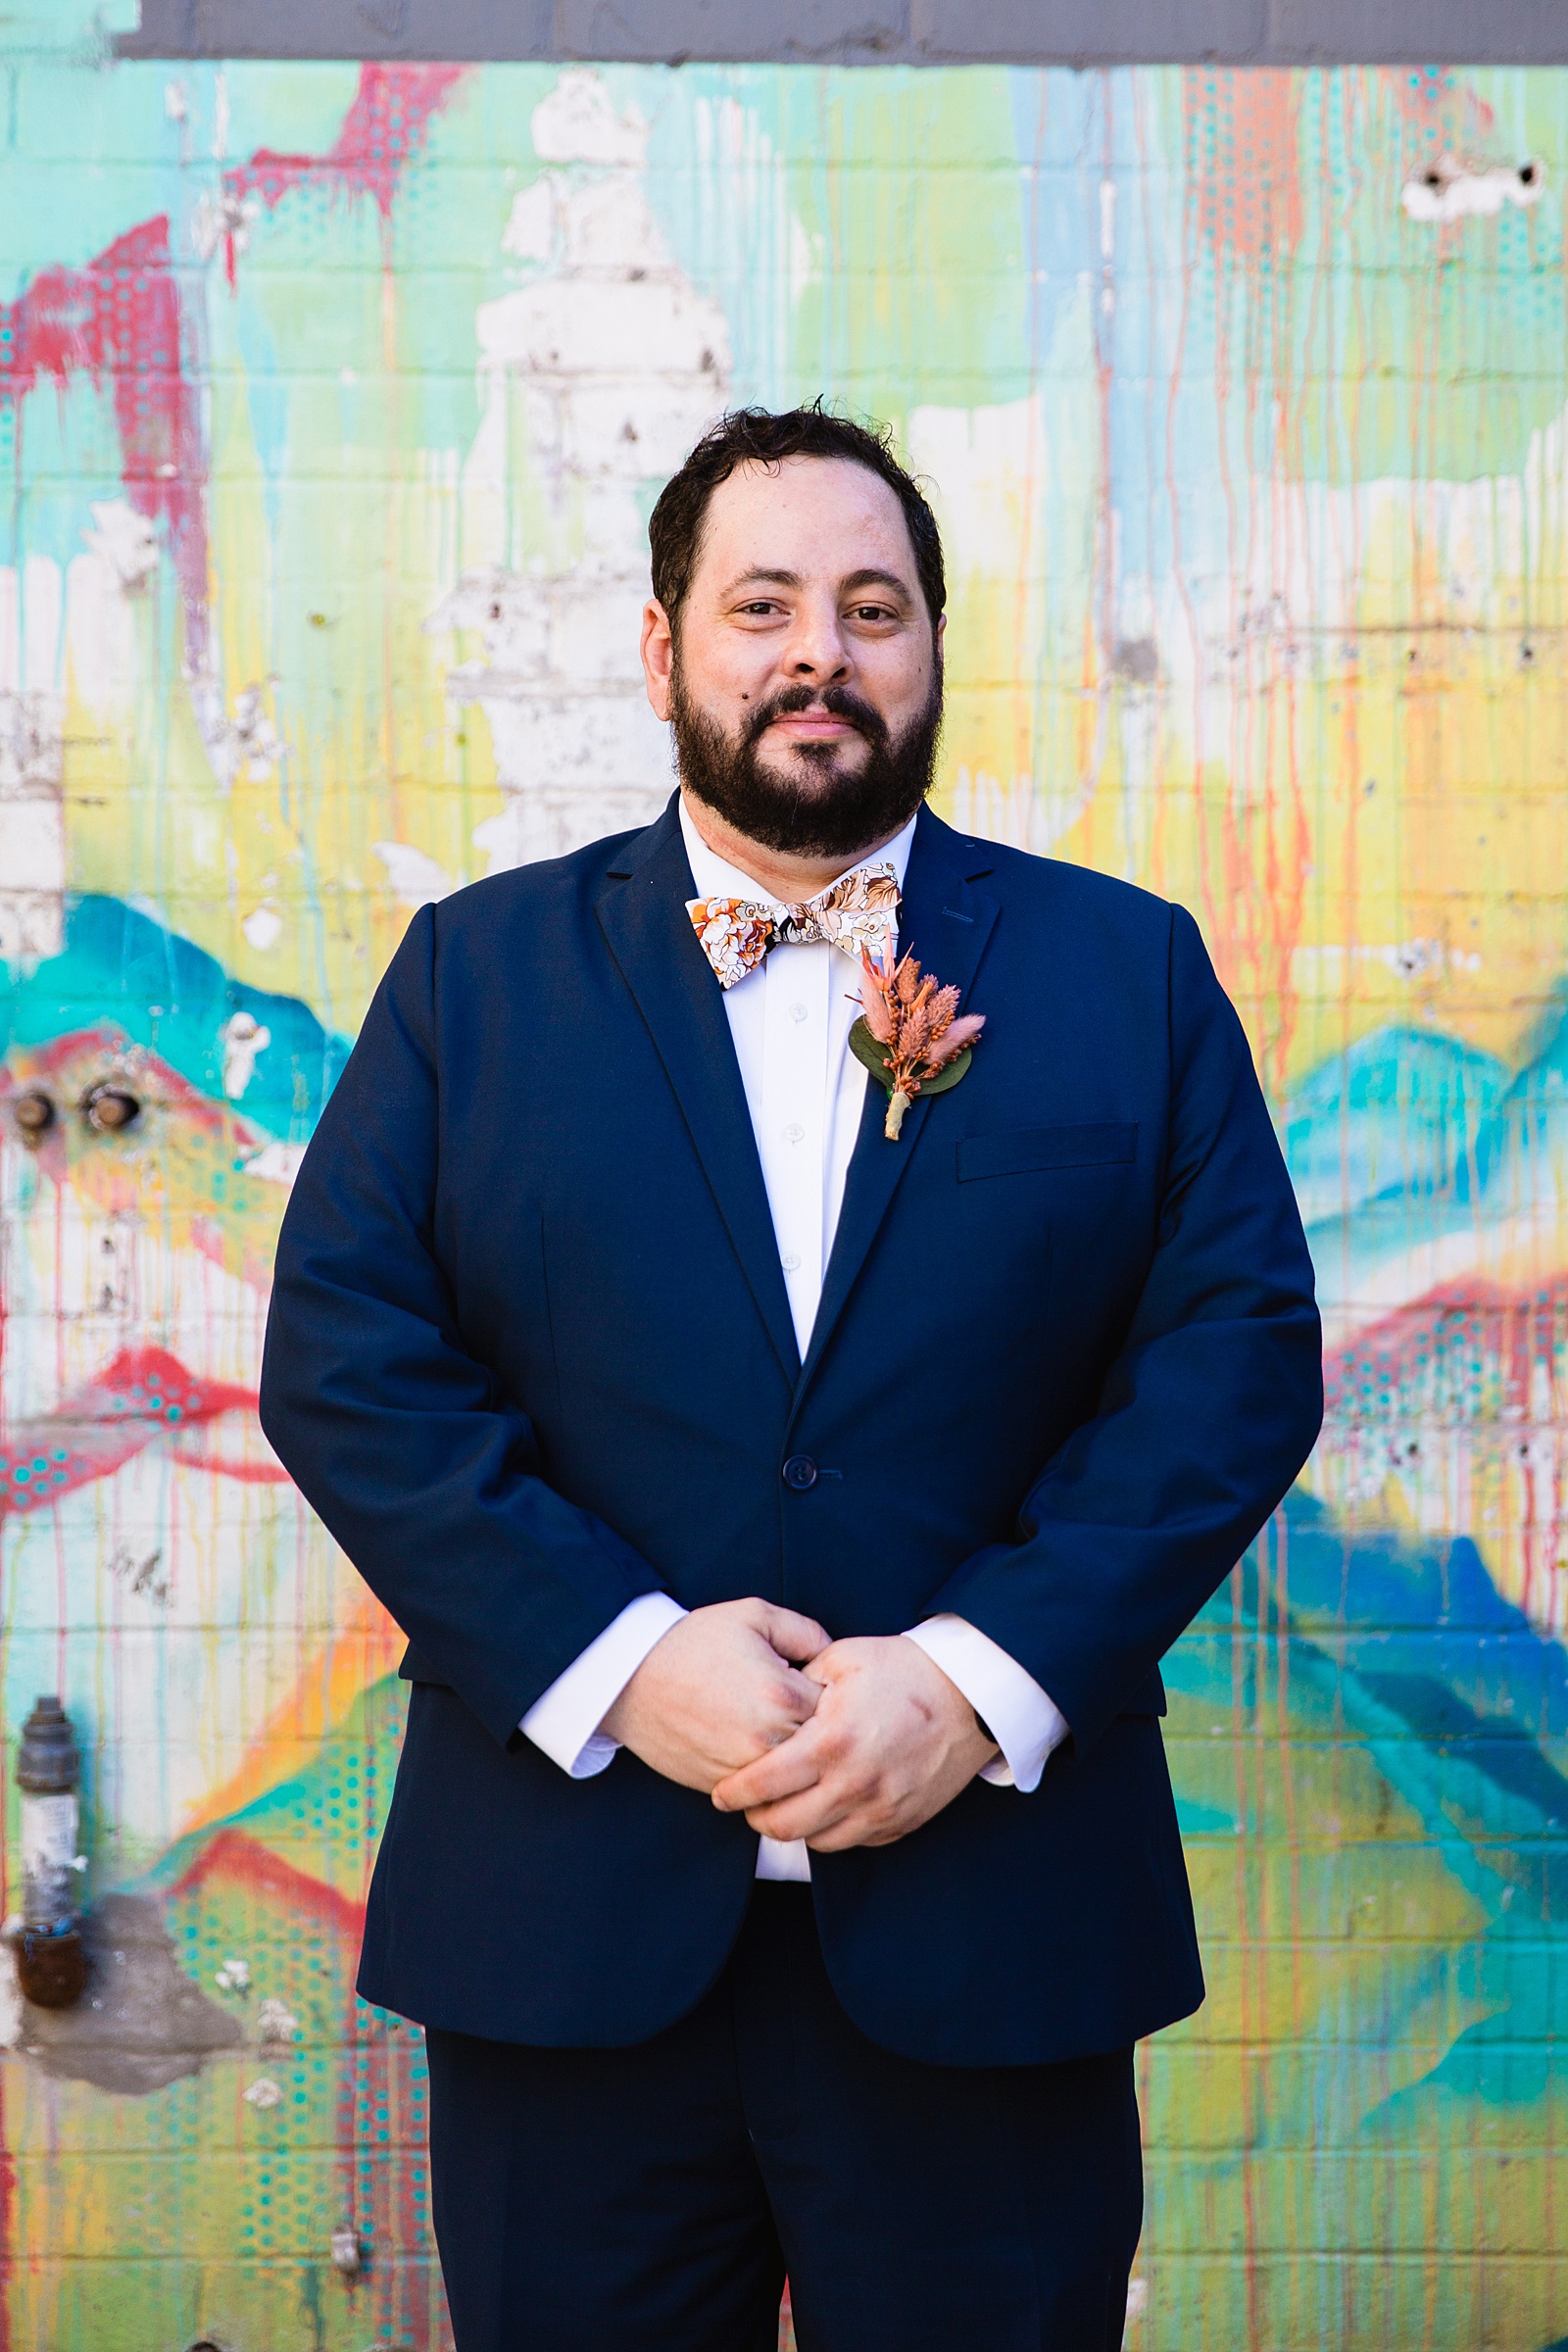 Groom in navy suit with floral bowtie in front of a colorful art mural for his MonOrchid wedding by PMA Photography.